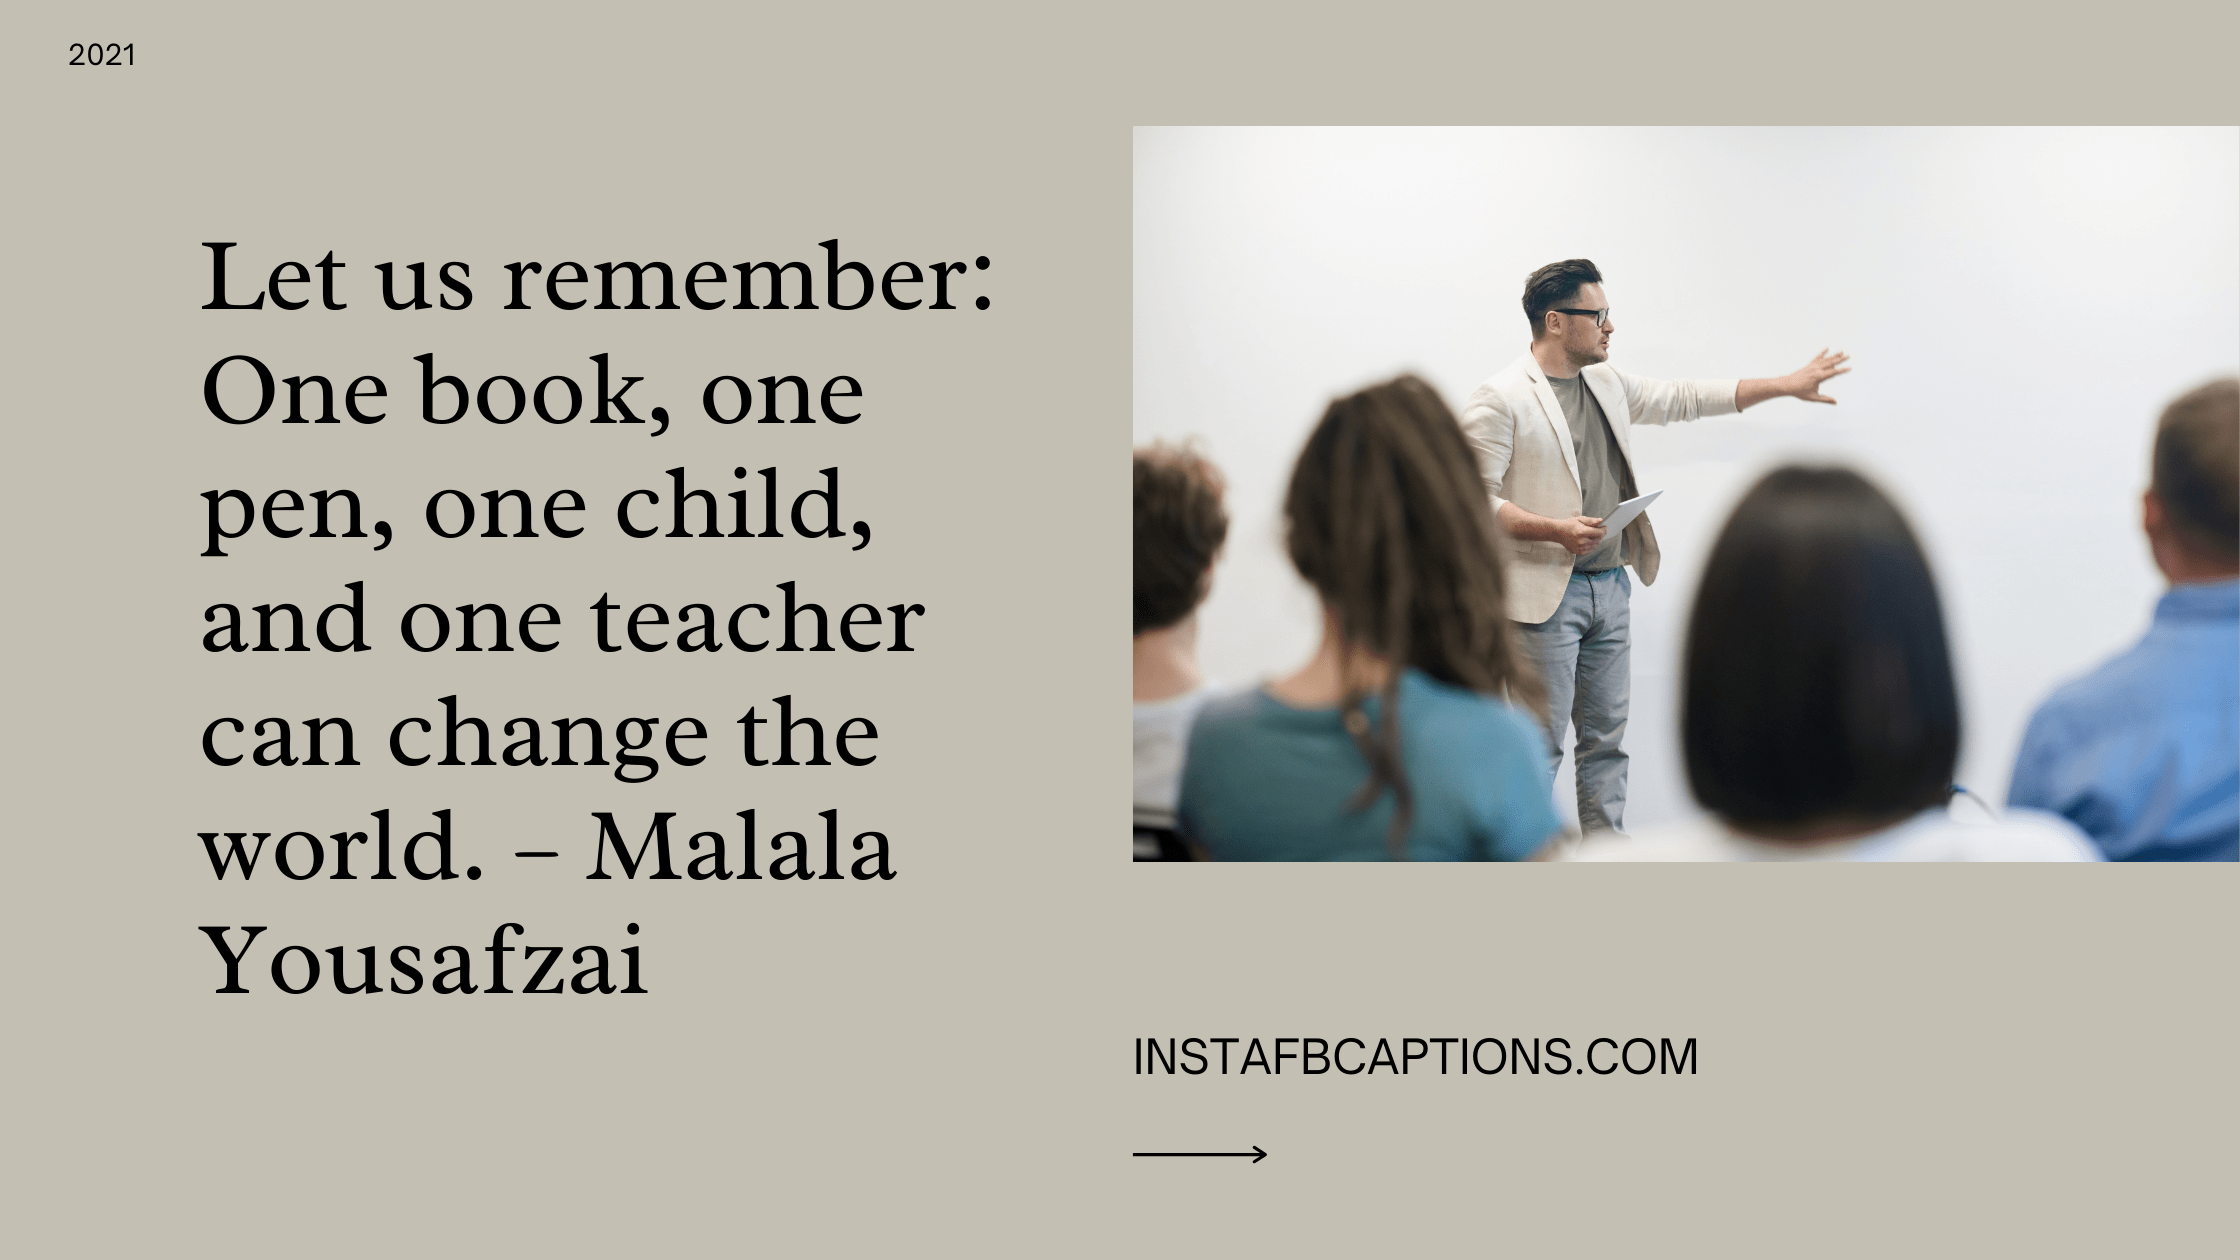 2021 Teacher’s Day Quotes  - 2021 Teacher   s Day Quotes  - 98 Teacher’s Day Captions for Instagram 2022